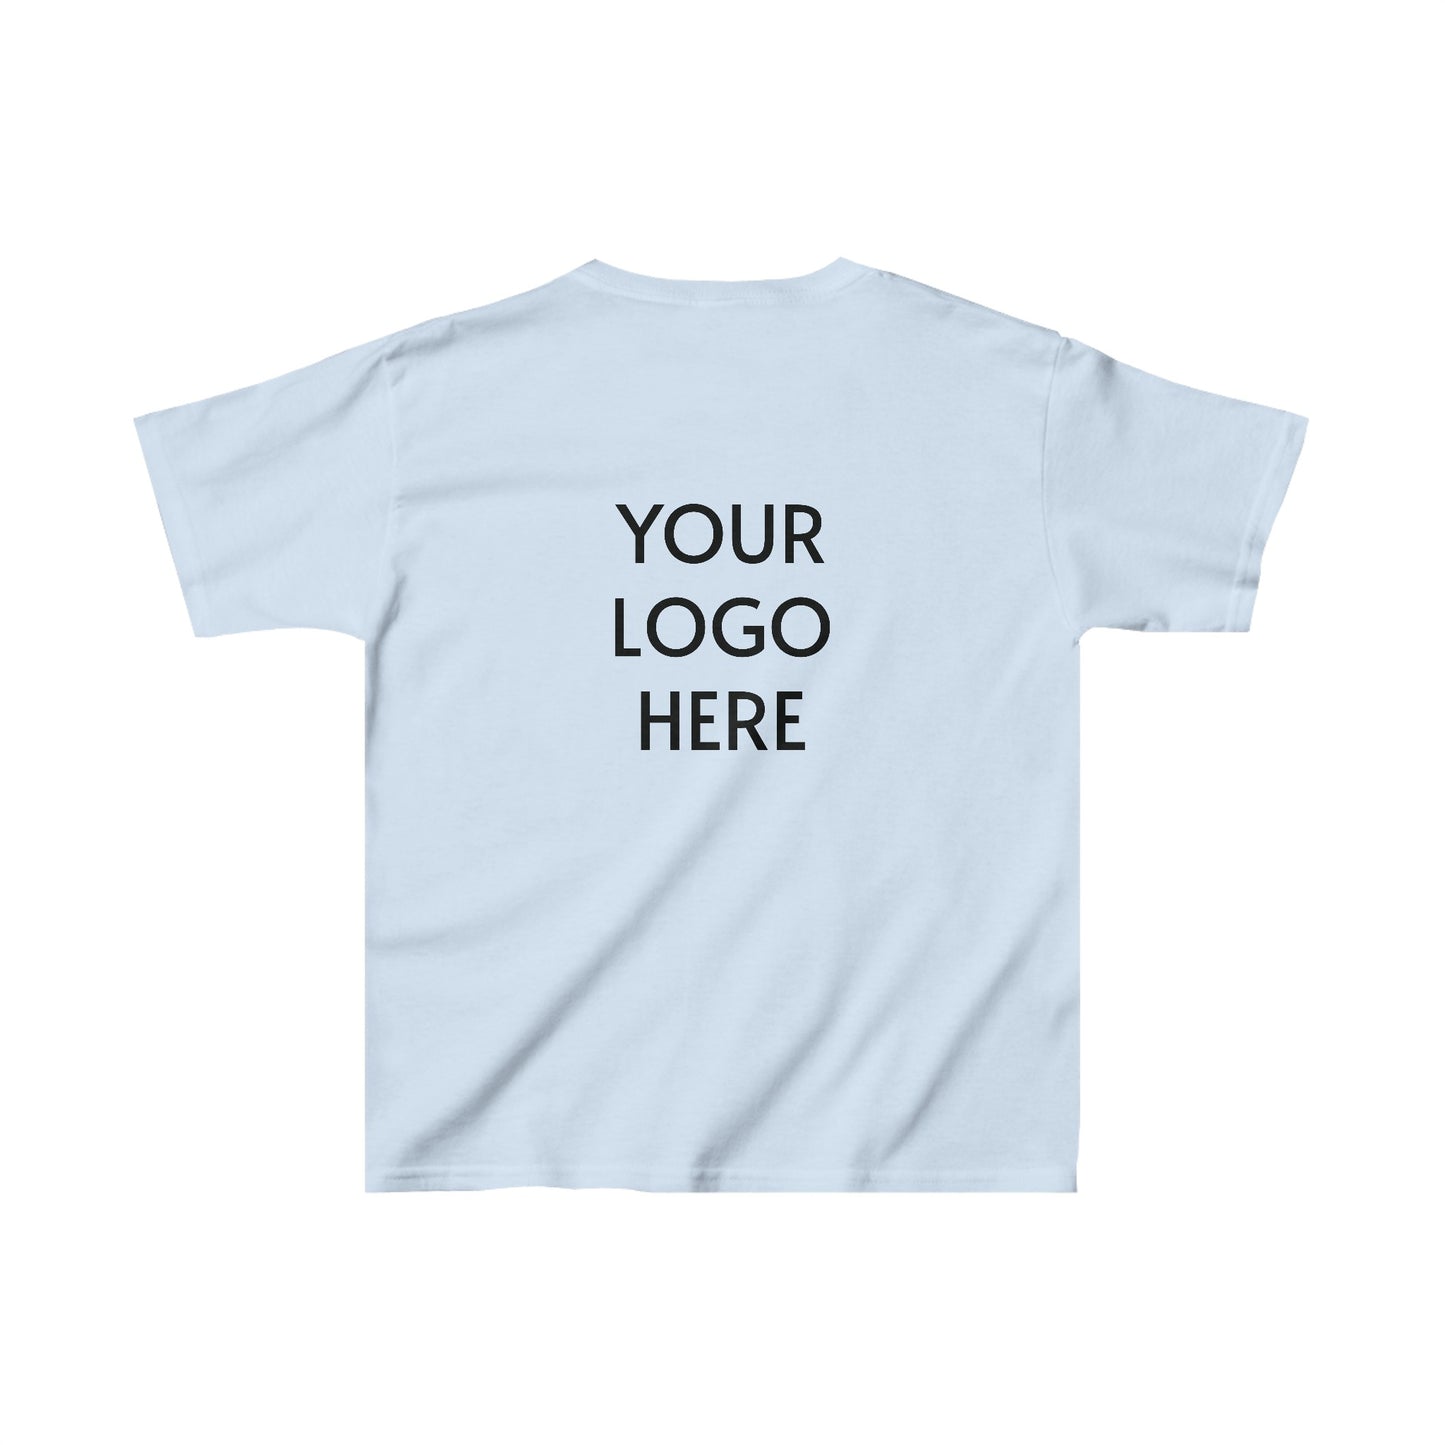 Kids Heavy Cotton™ Tee - Customizable Front and Back